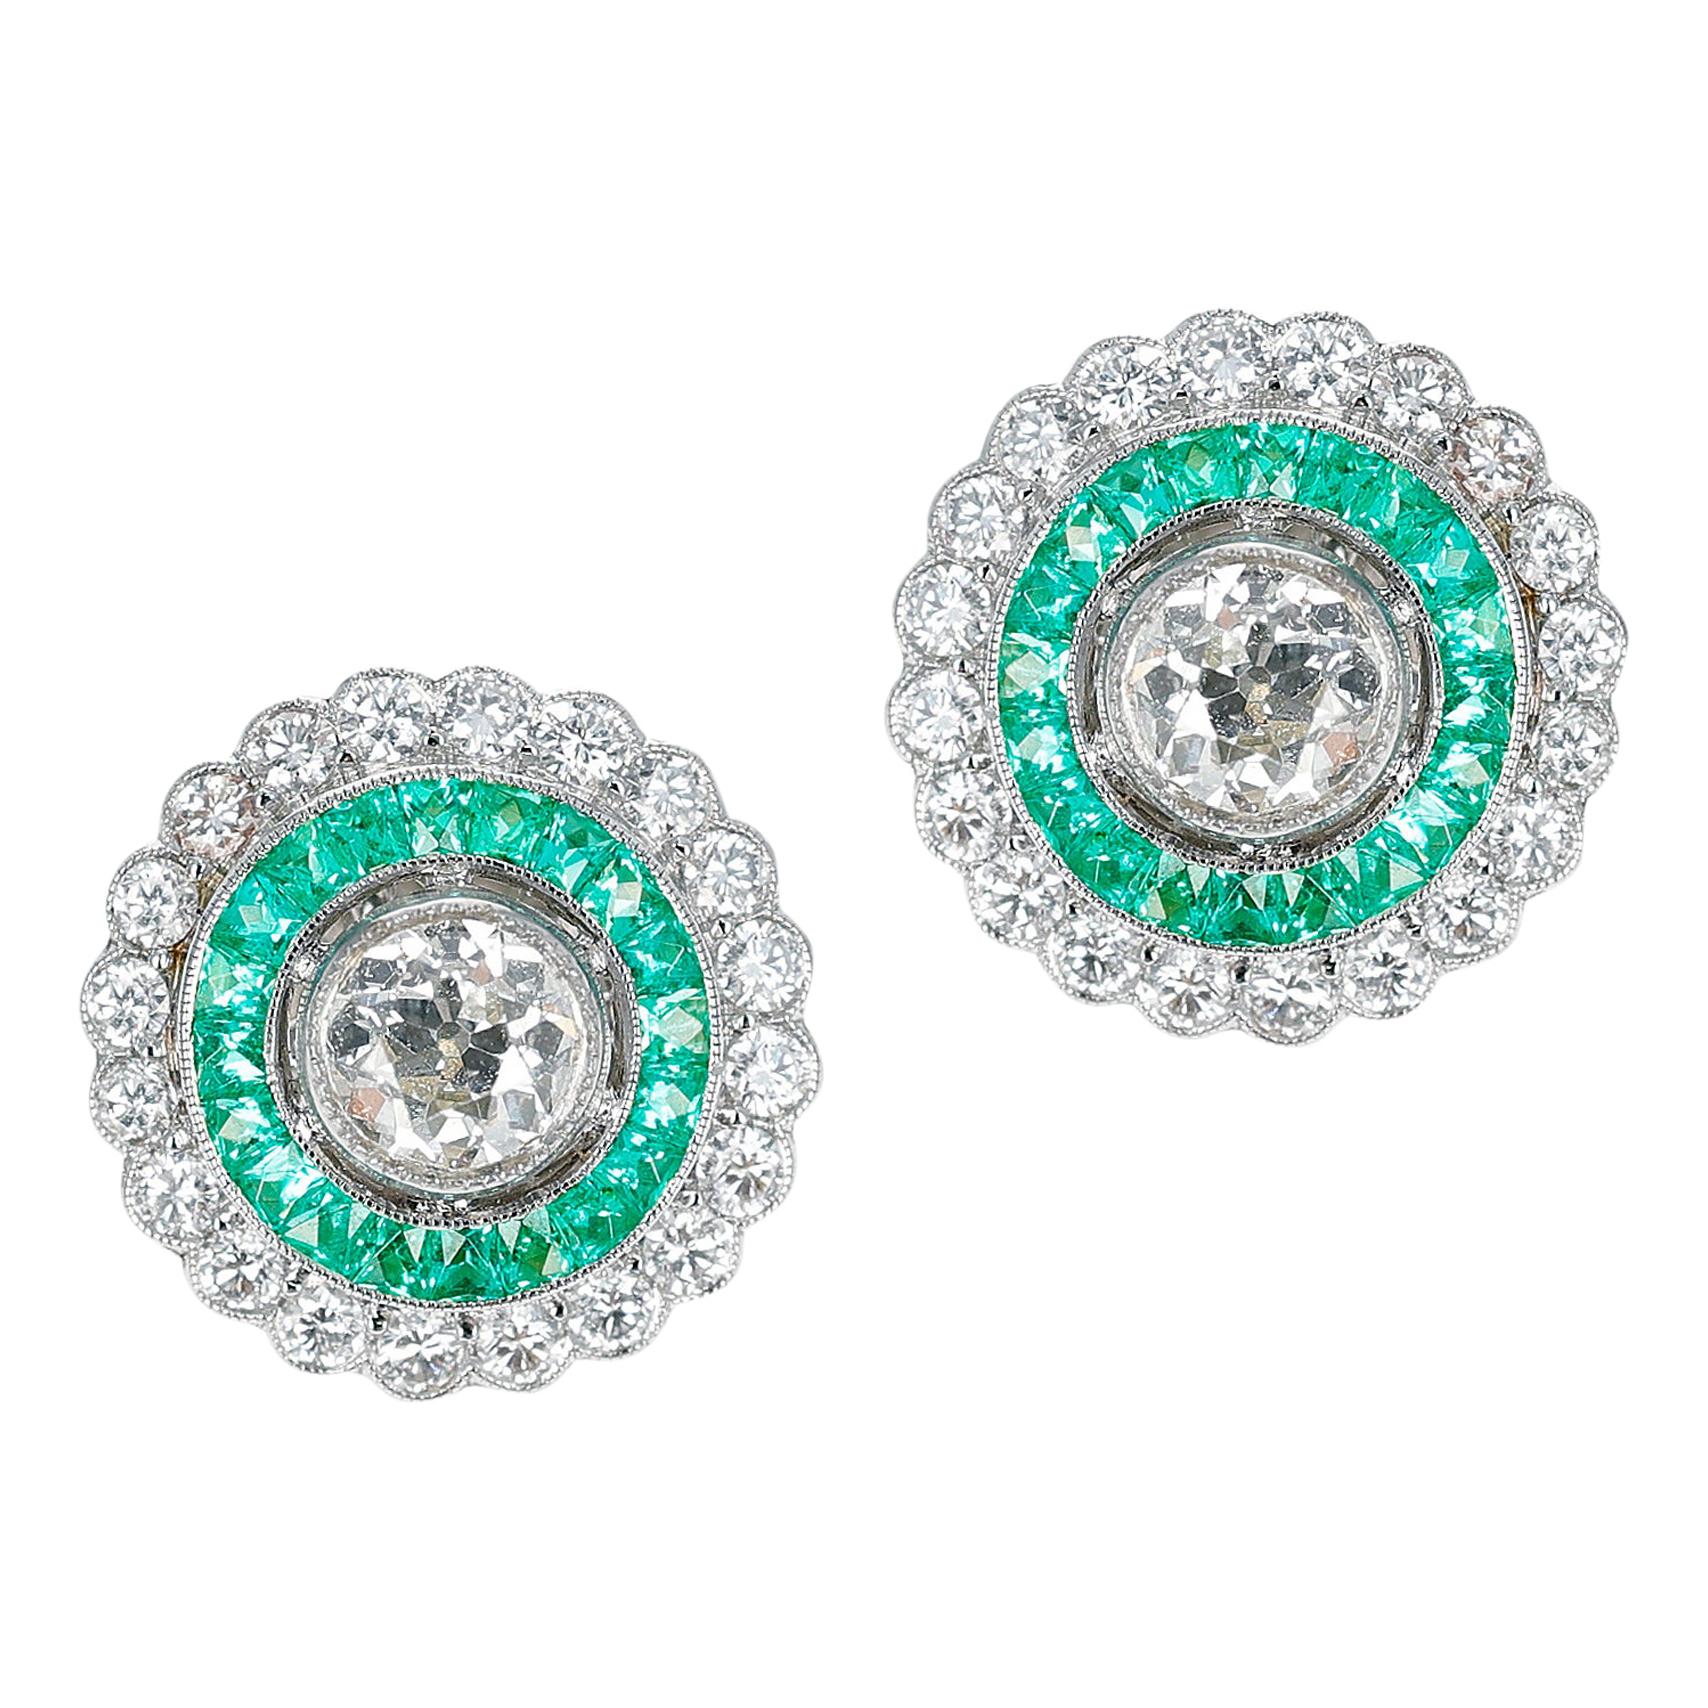 Art Deco Style 0.70 Ct. Each Diamond and Channel Set Emerald Earrings, Platinum